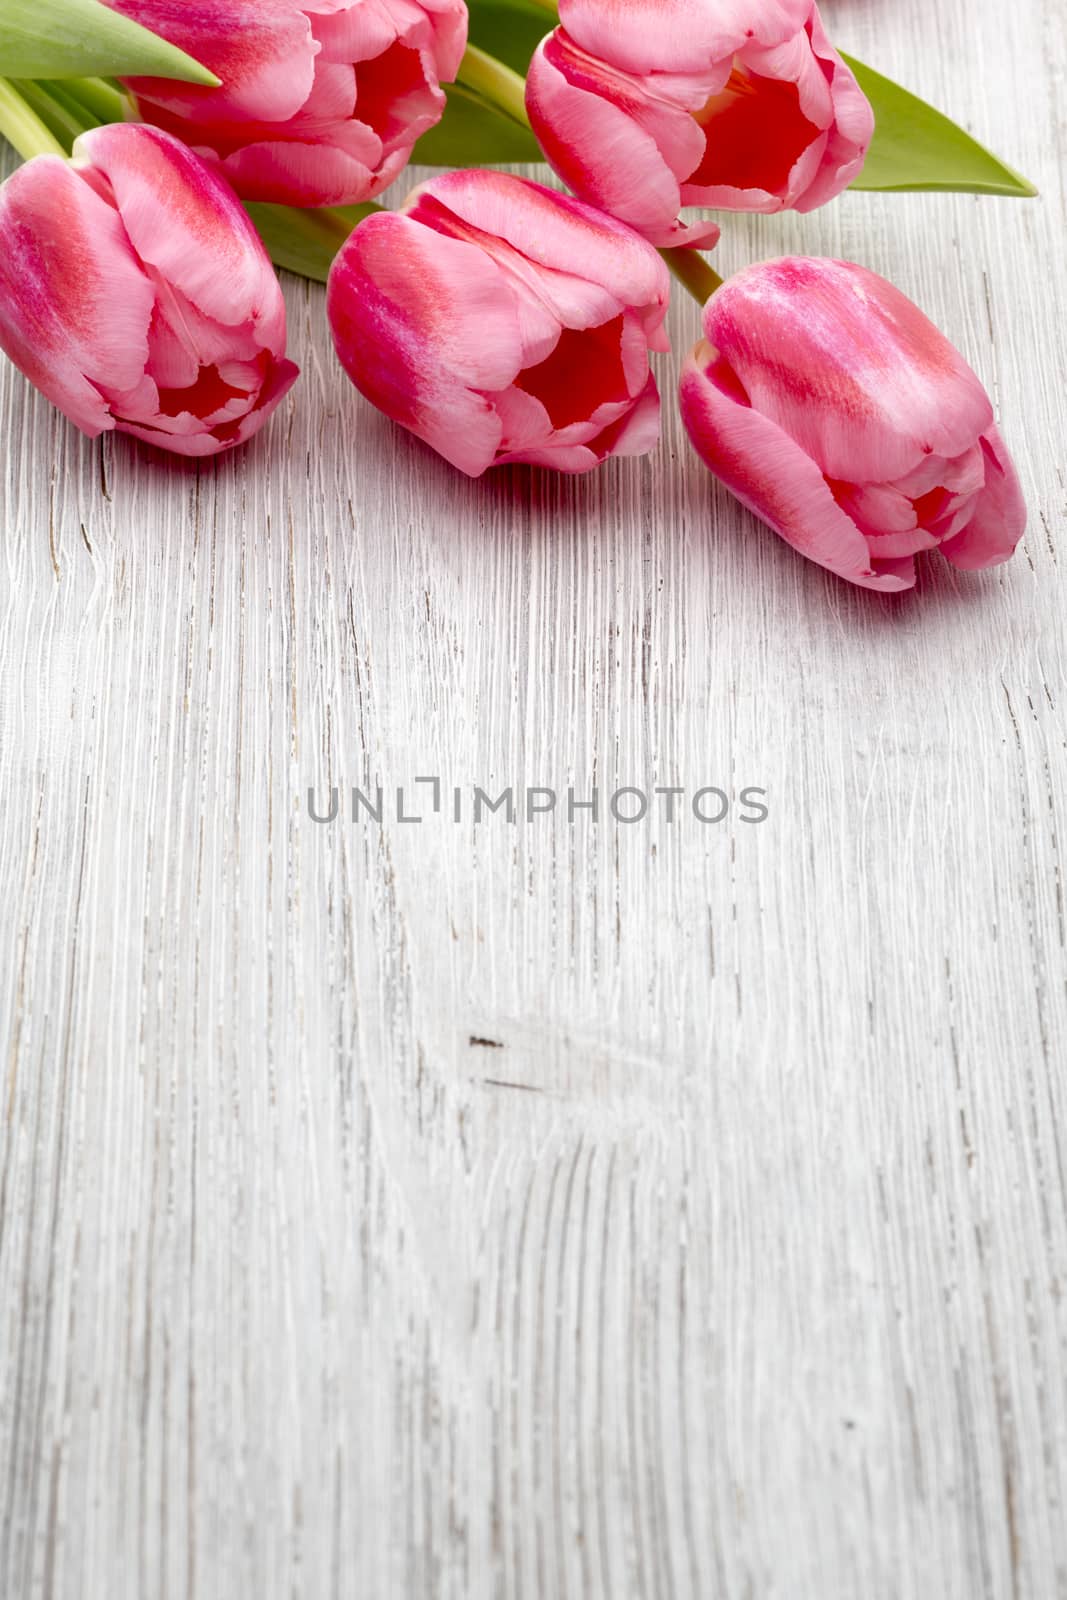 Pink tulips on the wooden background.